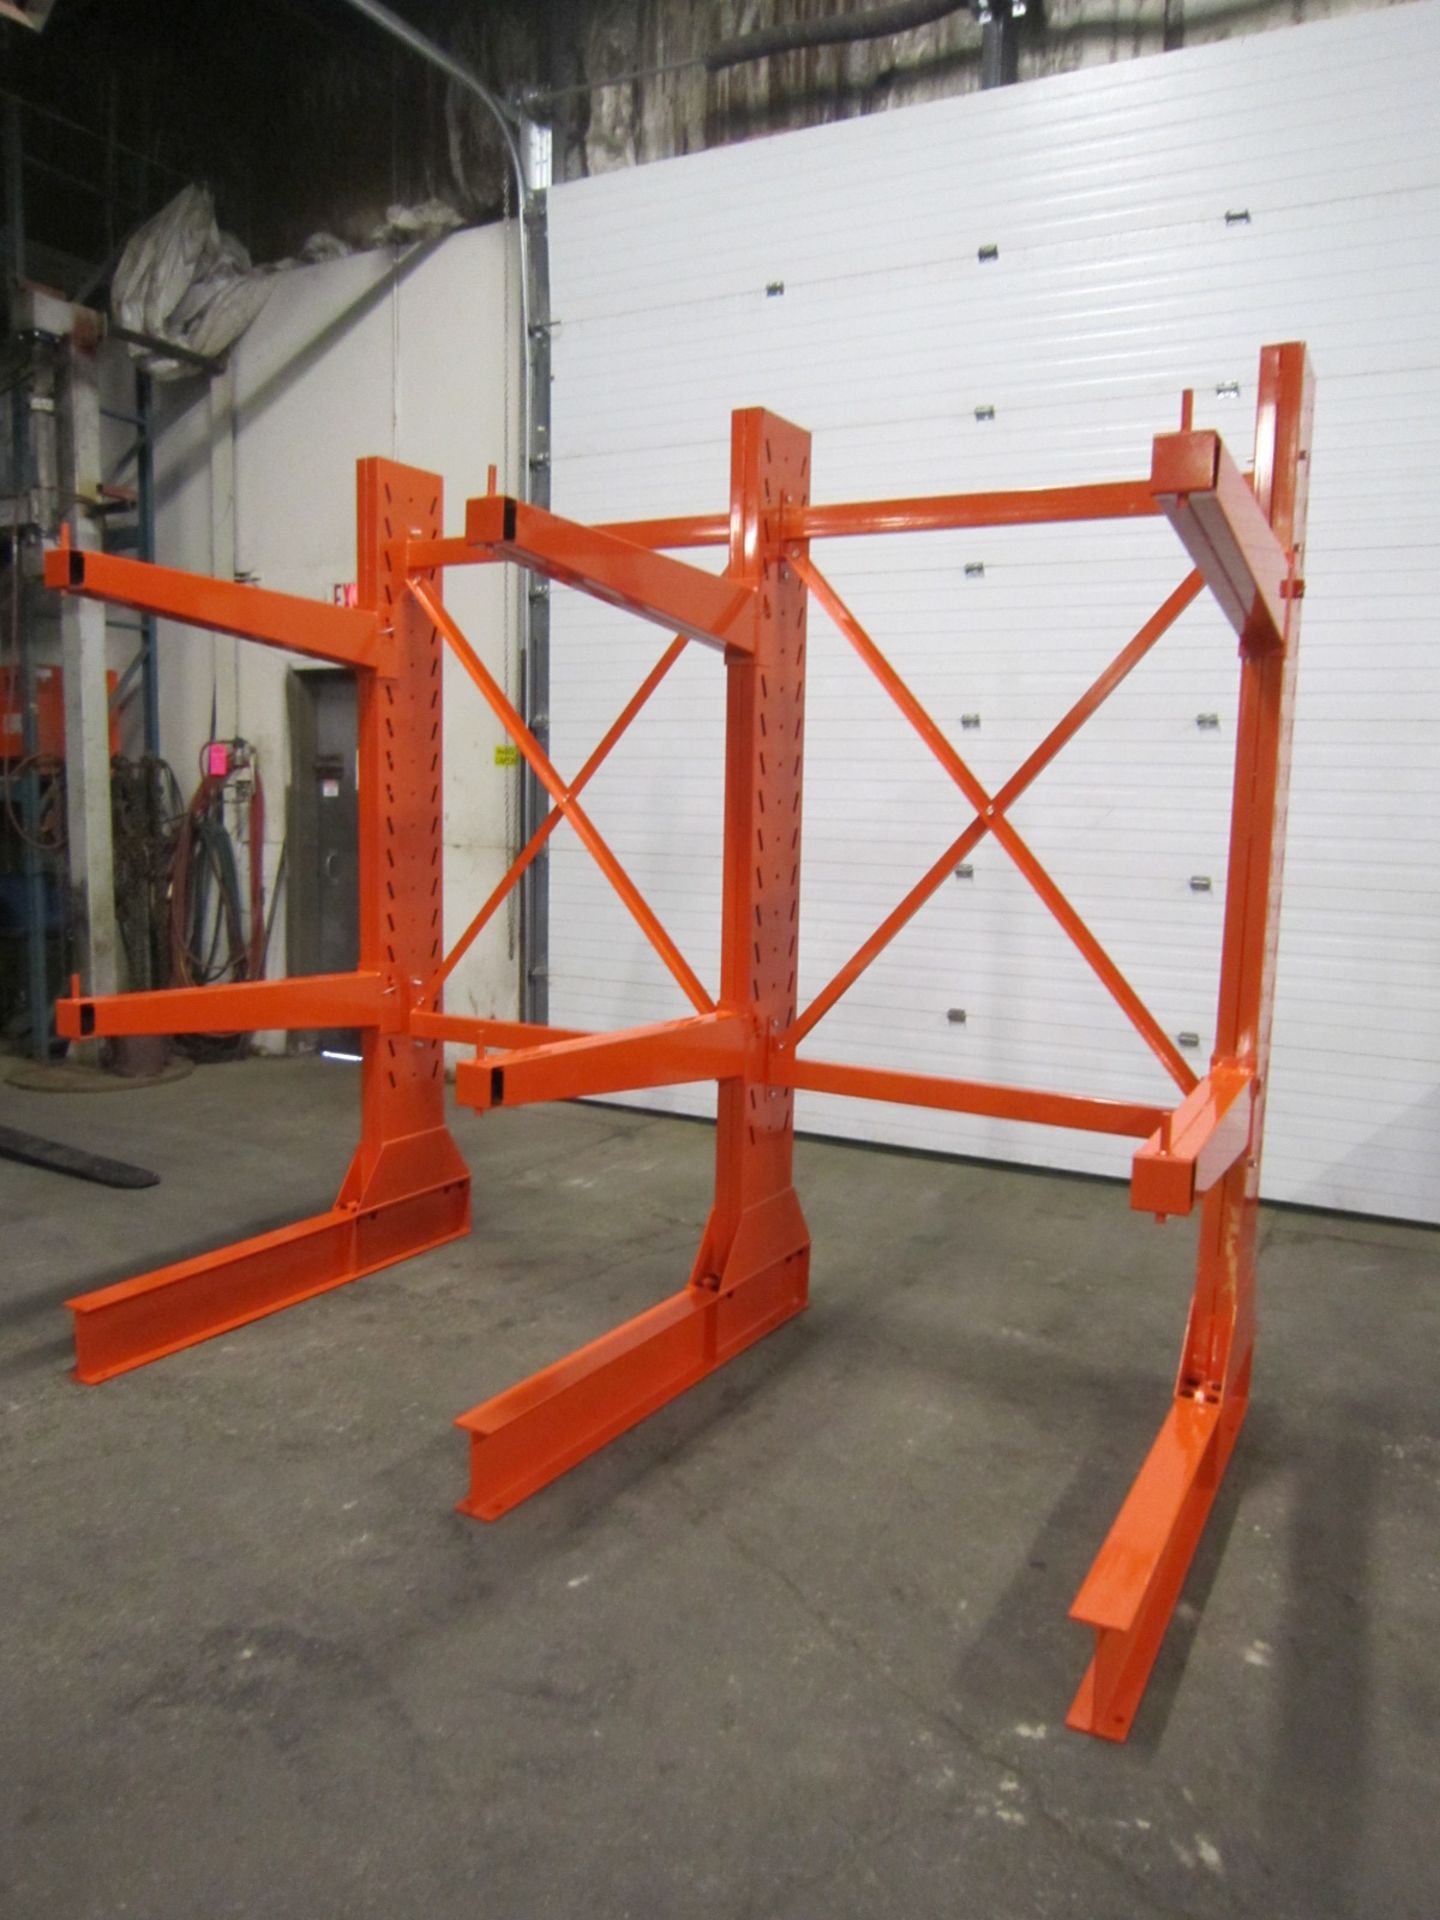 Lot of Heavy Duty Cantilever Racking - 3 full sections complete with SIX 4' arms - 100" tall units